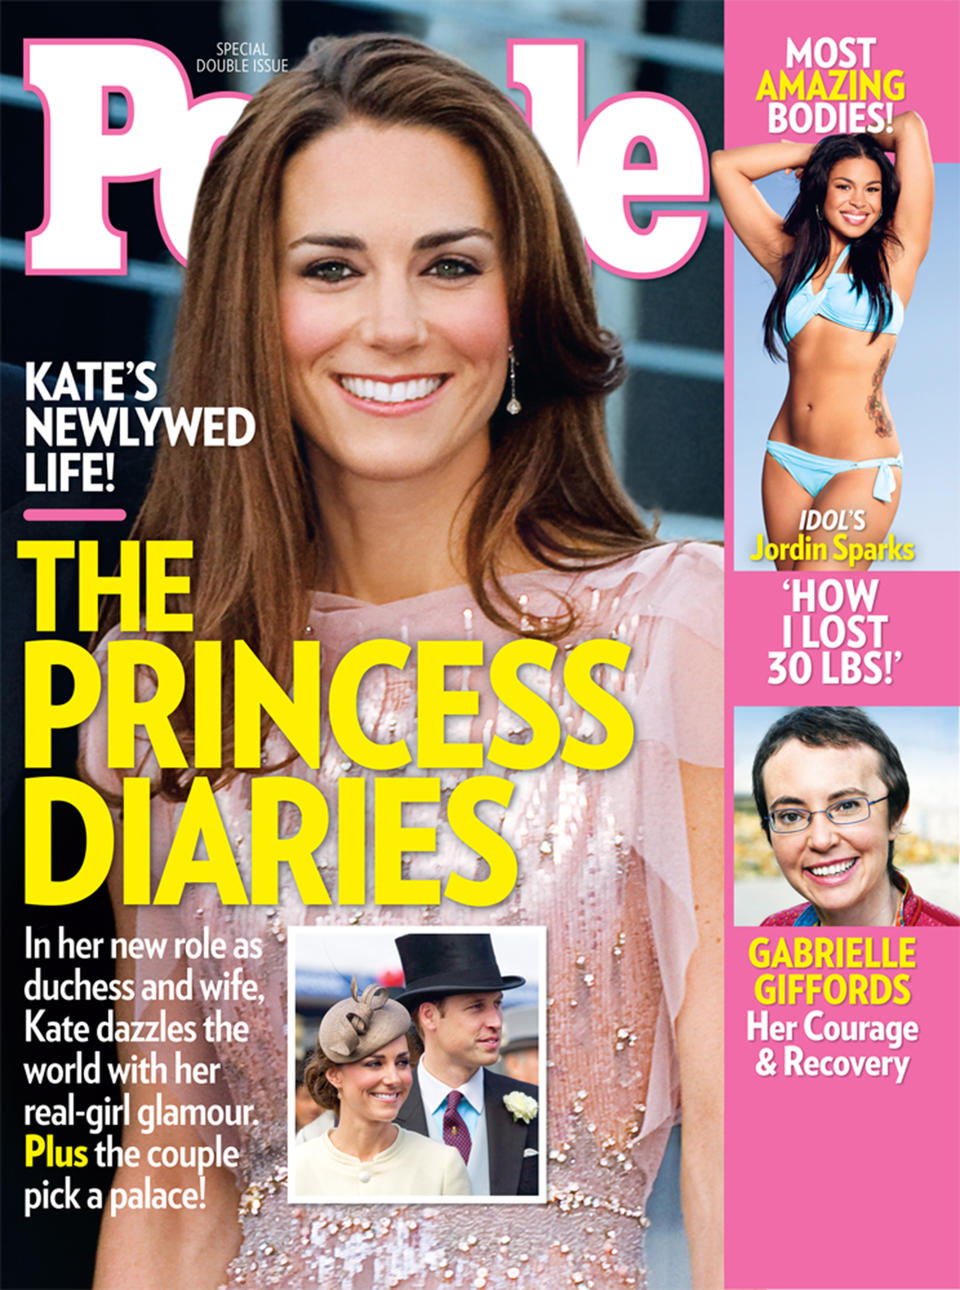 <p>Known in part for her curves, Sparks appeared on a June 2011 cover of PEOPLE talking about her 30-lb. slimdown. "Before, if I were to wear a bikini, it would just be in front of my mom or really close friends with a coverup," said the pop star, who credited eating smaller portions and taking Zumba, the popular Latin dance-inspired cardio class, for her "sexier" silhouette. "I feel good! I love that I still have my curves. I definitely didn't want to lose those," she said, adding, "I don't want to lose more weight. I just want to tone. I'm in a really good place now."</p>